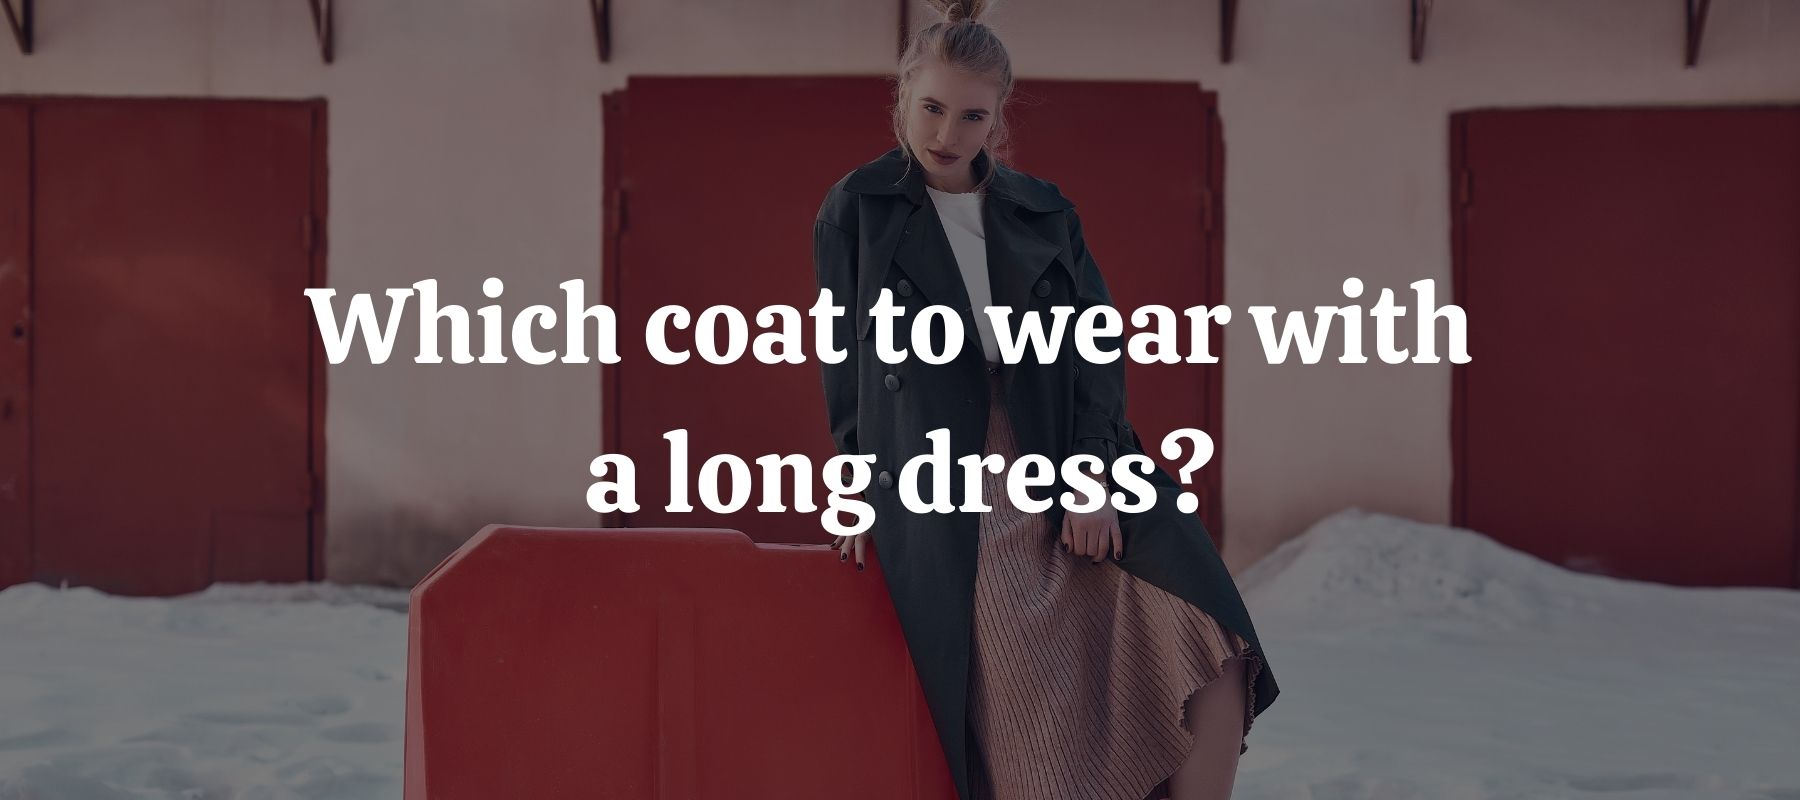 Which coat to wear with a long dress